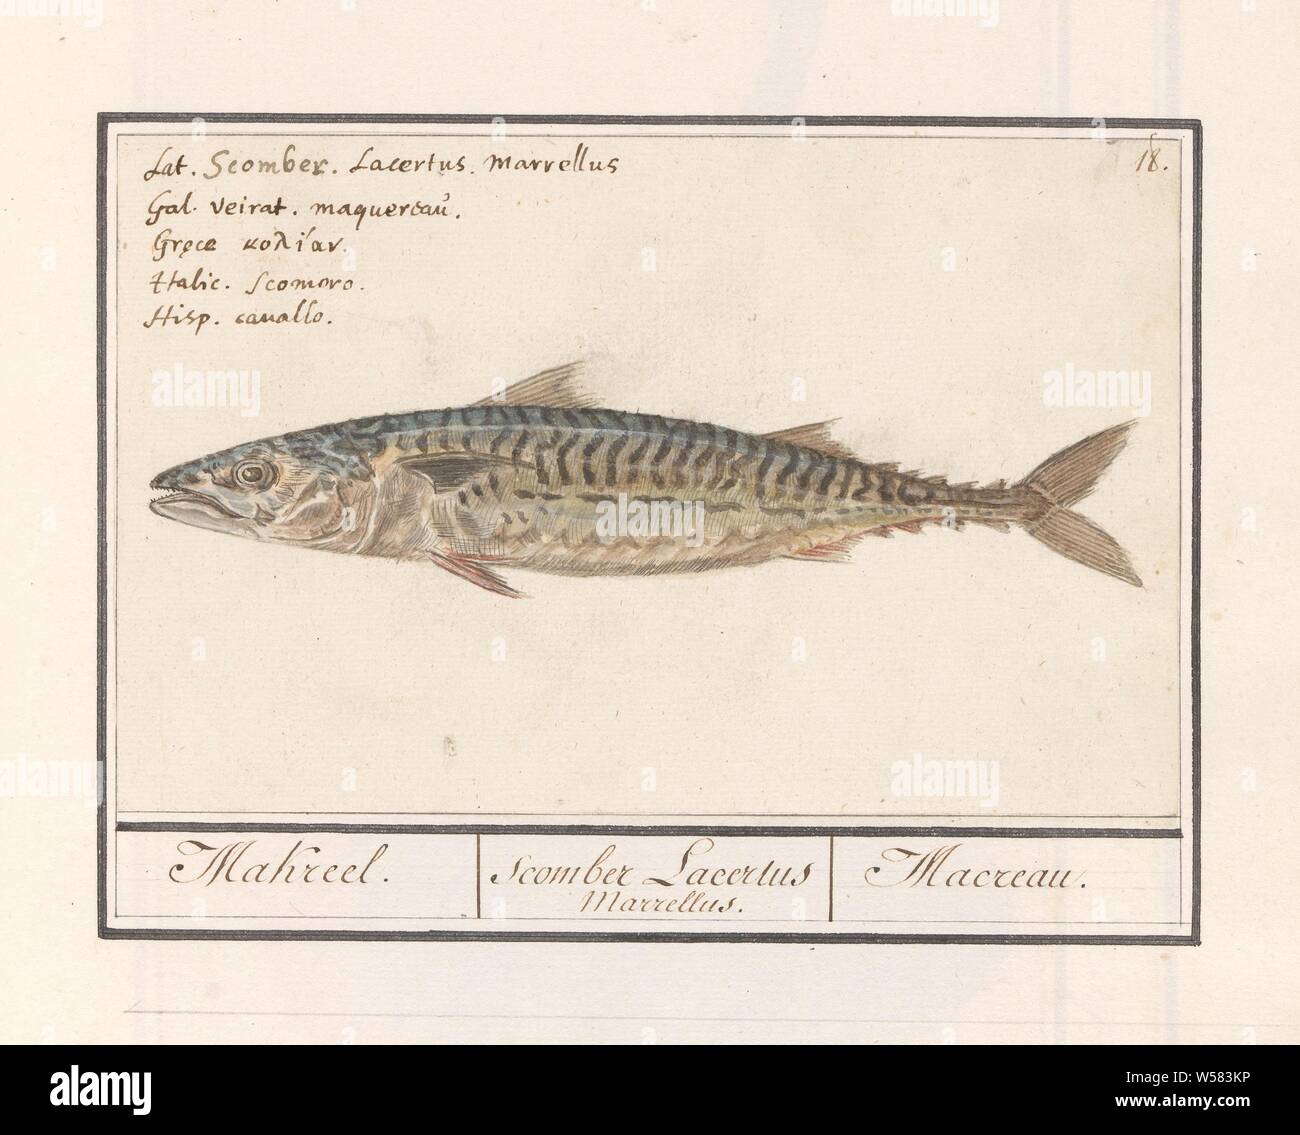 Mackerel (Scomber scombrus), Mackerel. / Scomber Lacertus Marrellus. / Macreau. (title on object), Mackerel. Numbered top right: 18. Top left the name in five languages. Part of the sixth album with drawings of fish, shells and insects. Sixth of twelve albums with drawings of animals, birds and plants known around 1600, commissioned by Emperor Rudolf II. With explanations in Dutch, Latin and French, bony fishes: mackerel, Anselmus Boetius de Boodt, 1596 - 1610, paper, pencil, chalk, watercolor (paint), ink, pen, h 126 mm × w 197 mm Stock Photo